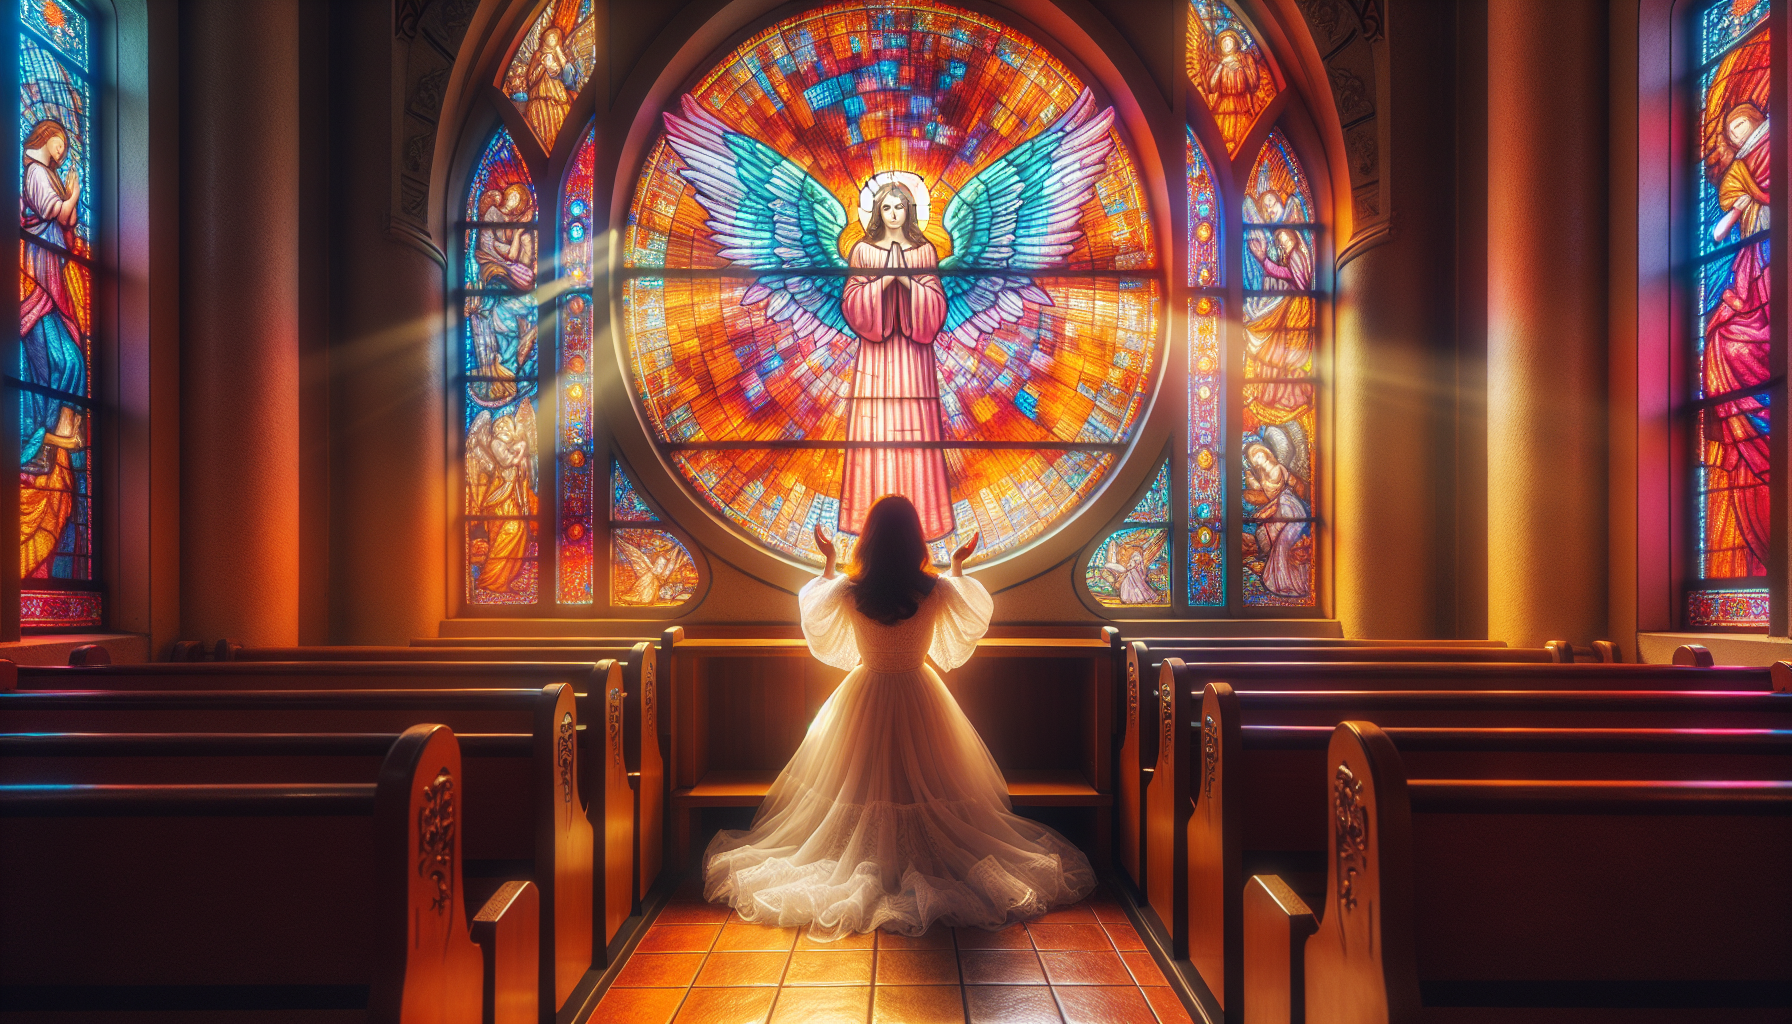 An ethereal, warmly lit chapel interior, with a middle-aged woman in a flowing white dress kneeling devoutly at a wooden pew, her hands clasped in prayer. Above her, a stained glass window depicting a